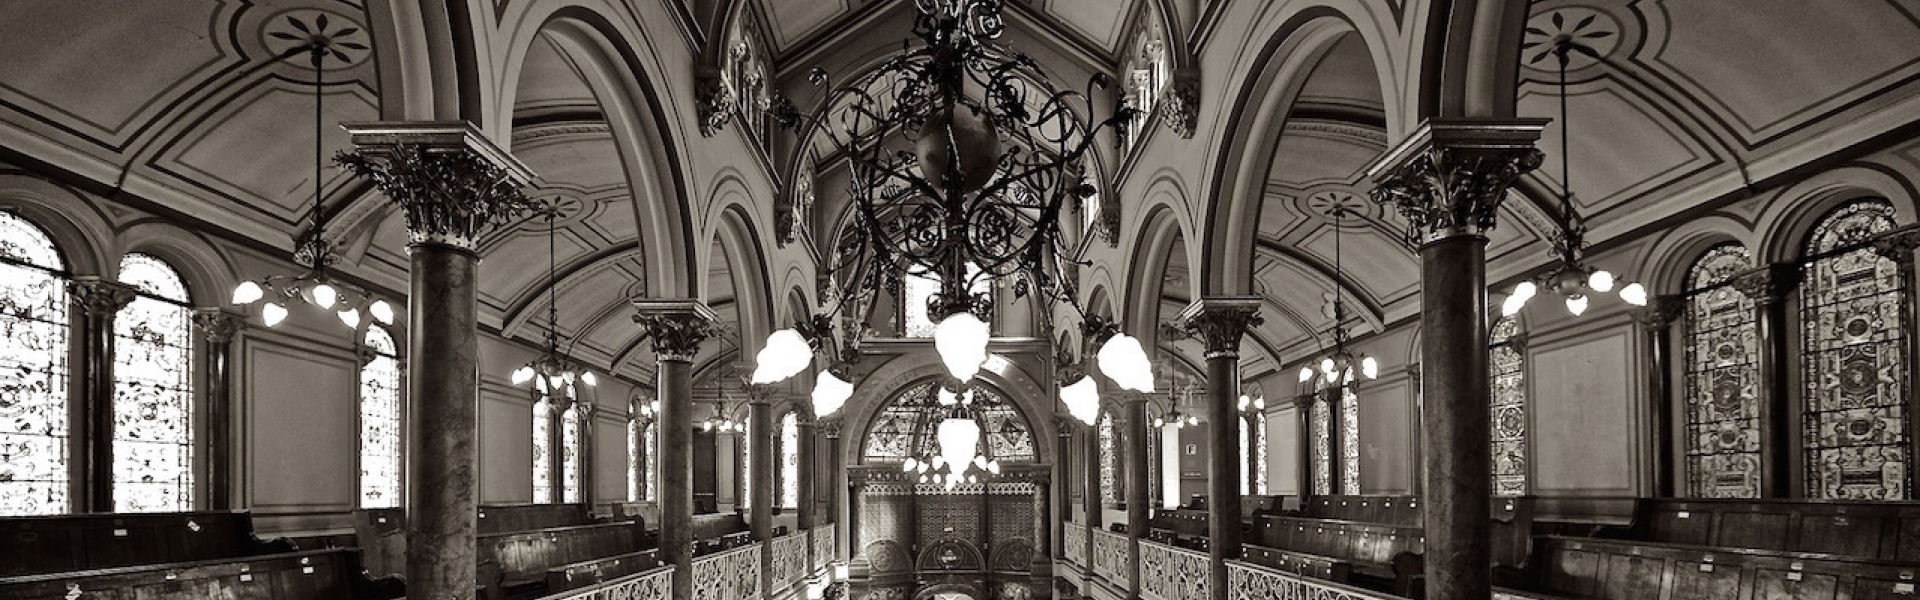 black and white interior of a synagogue